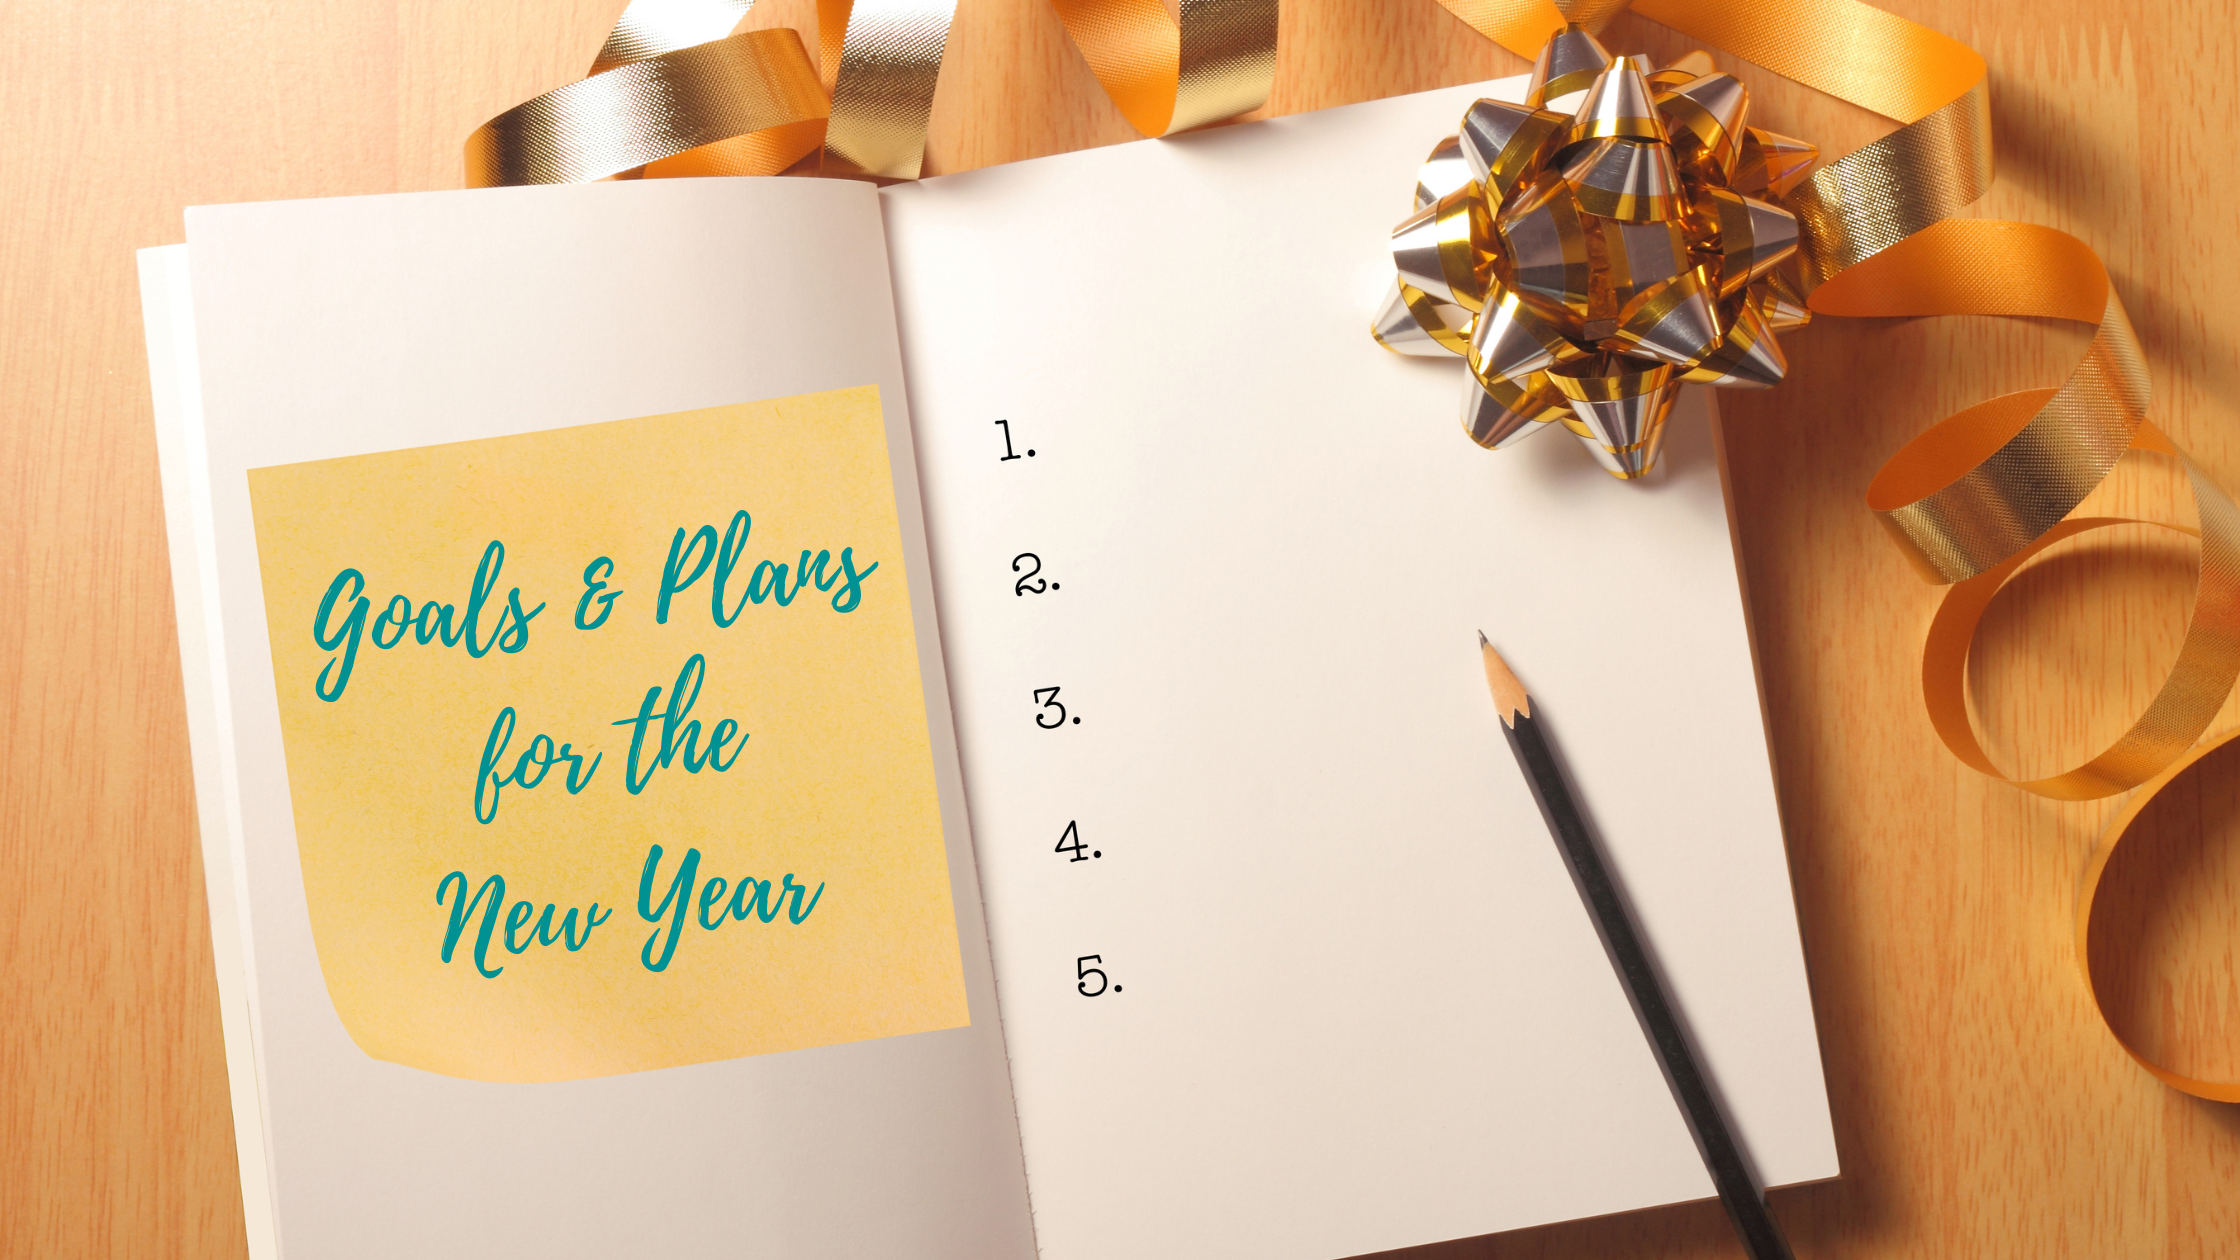 Here’s a Planning Checklist for a Great New Year!